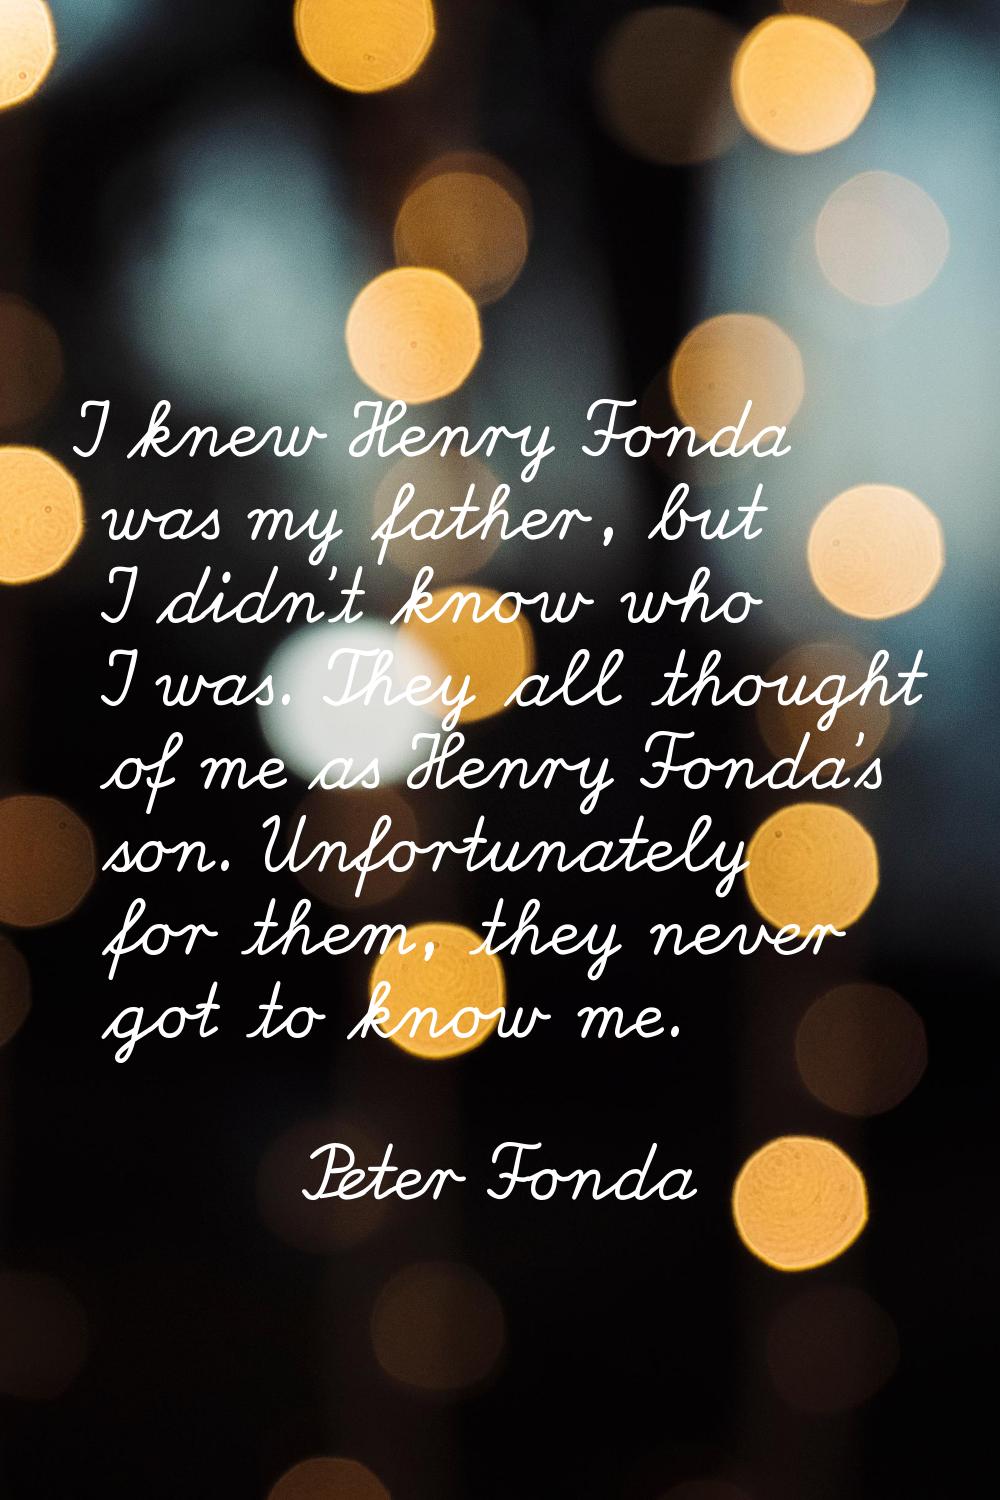 I knew Henry Fonda was my father, but I didn't know who I was. They all thought of me as Henry Fond